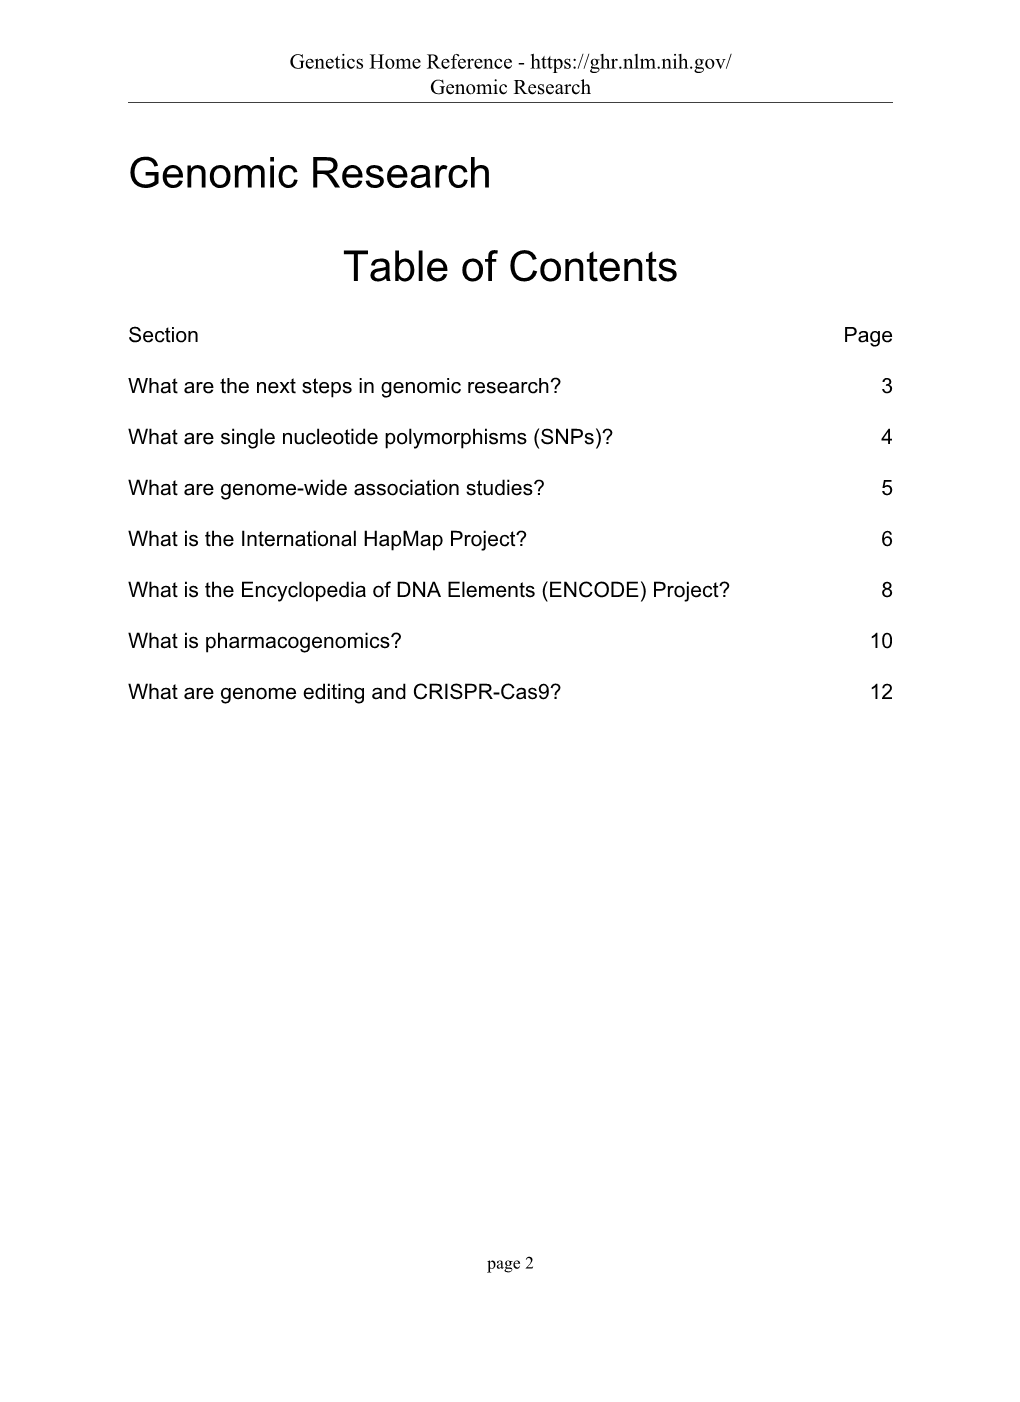 Genomic Research Table of Contents